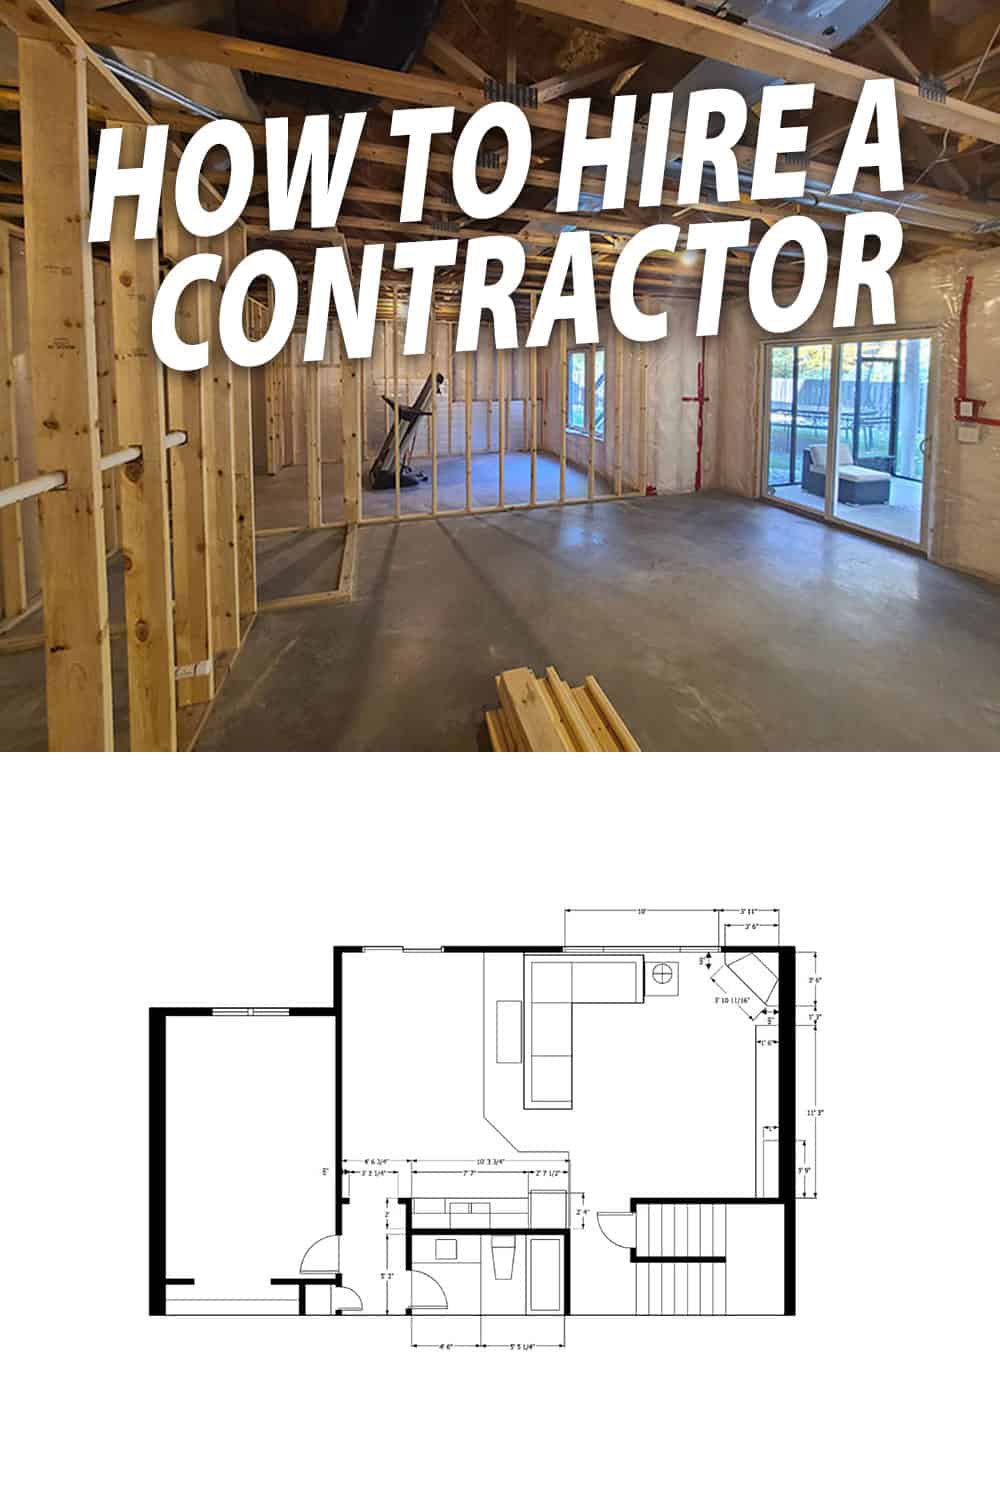 How To Hire A Contractor For Your Remodeling Project